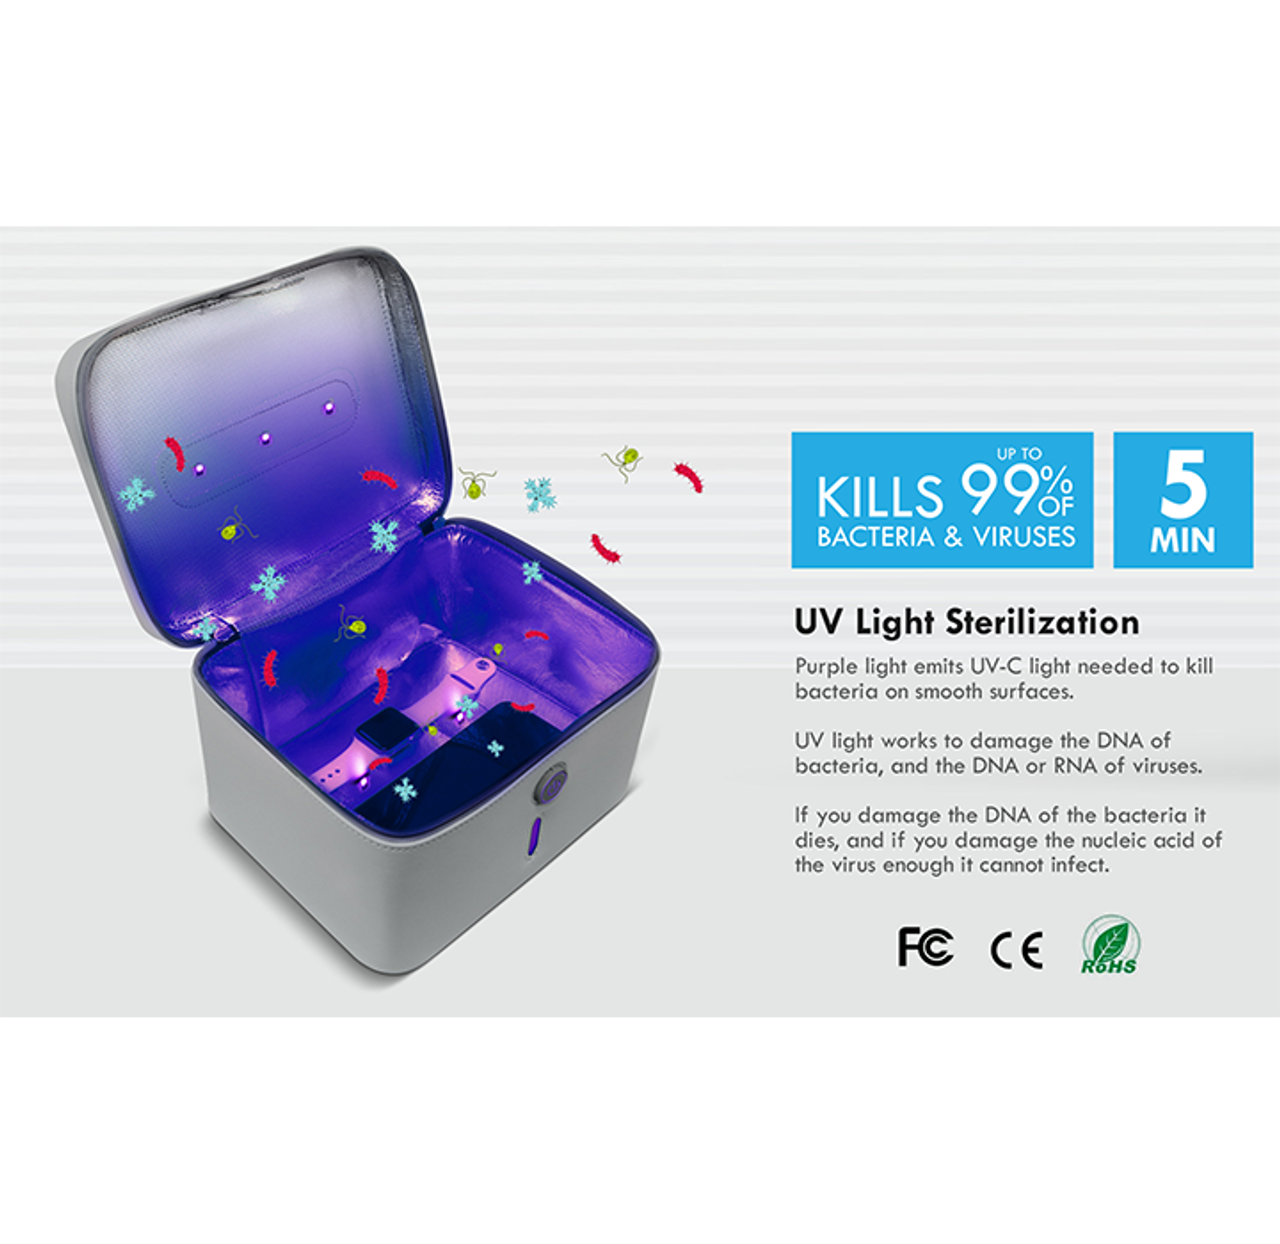 U-Clean Portable UV Light Sanitizing and Disinfection Bag product image